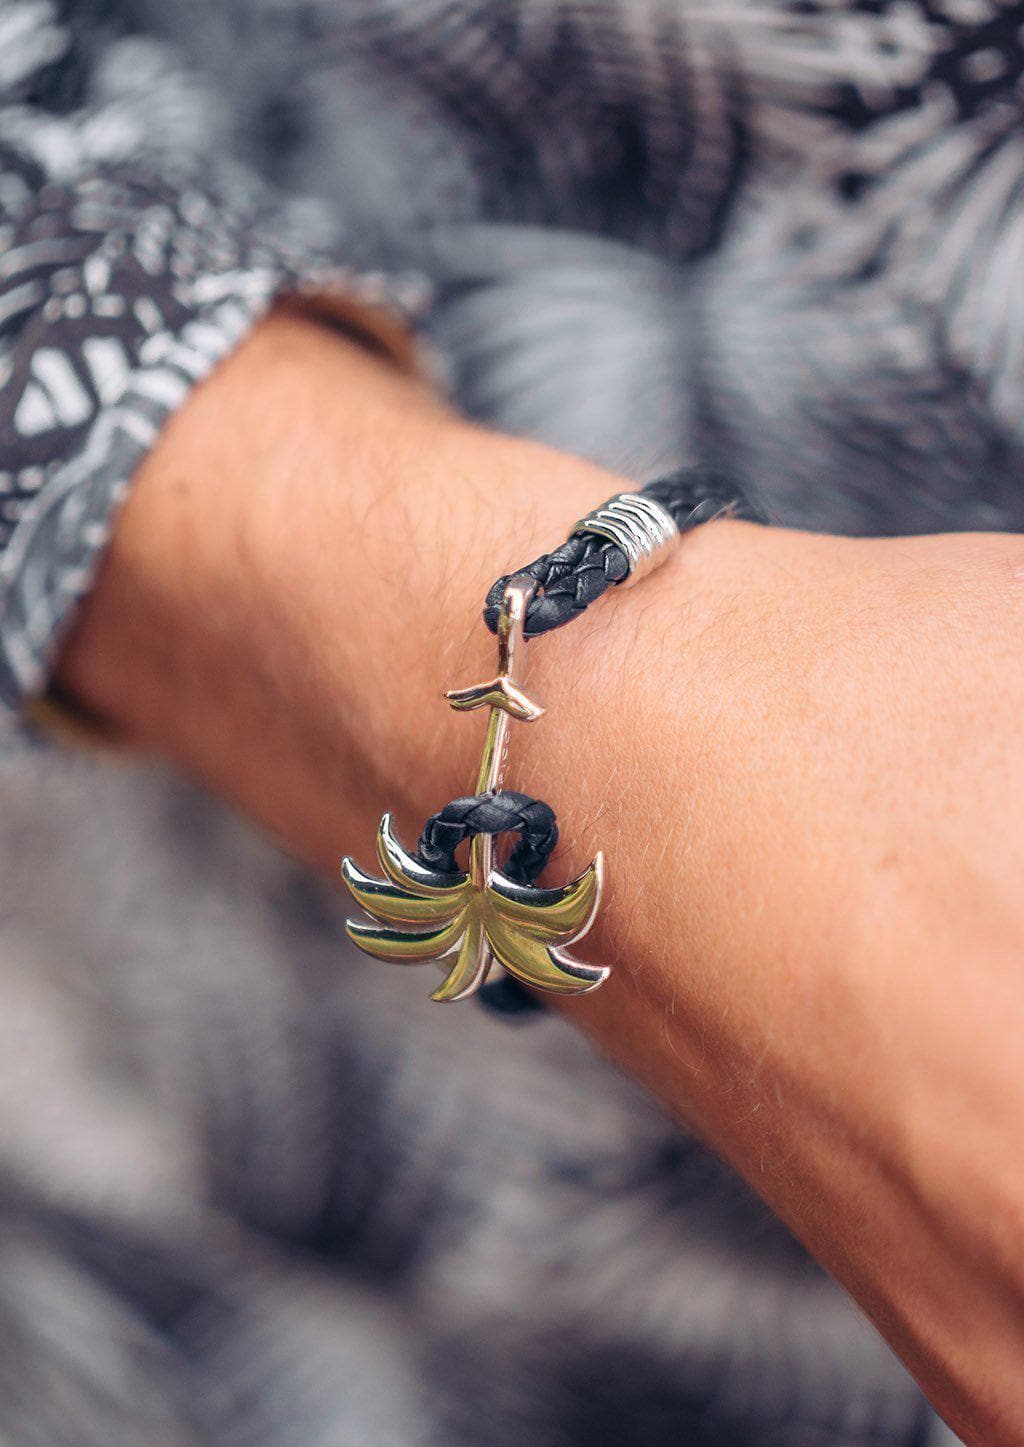 Twilight Silver - Palm anchor bracelet with black leather. On male models arm.